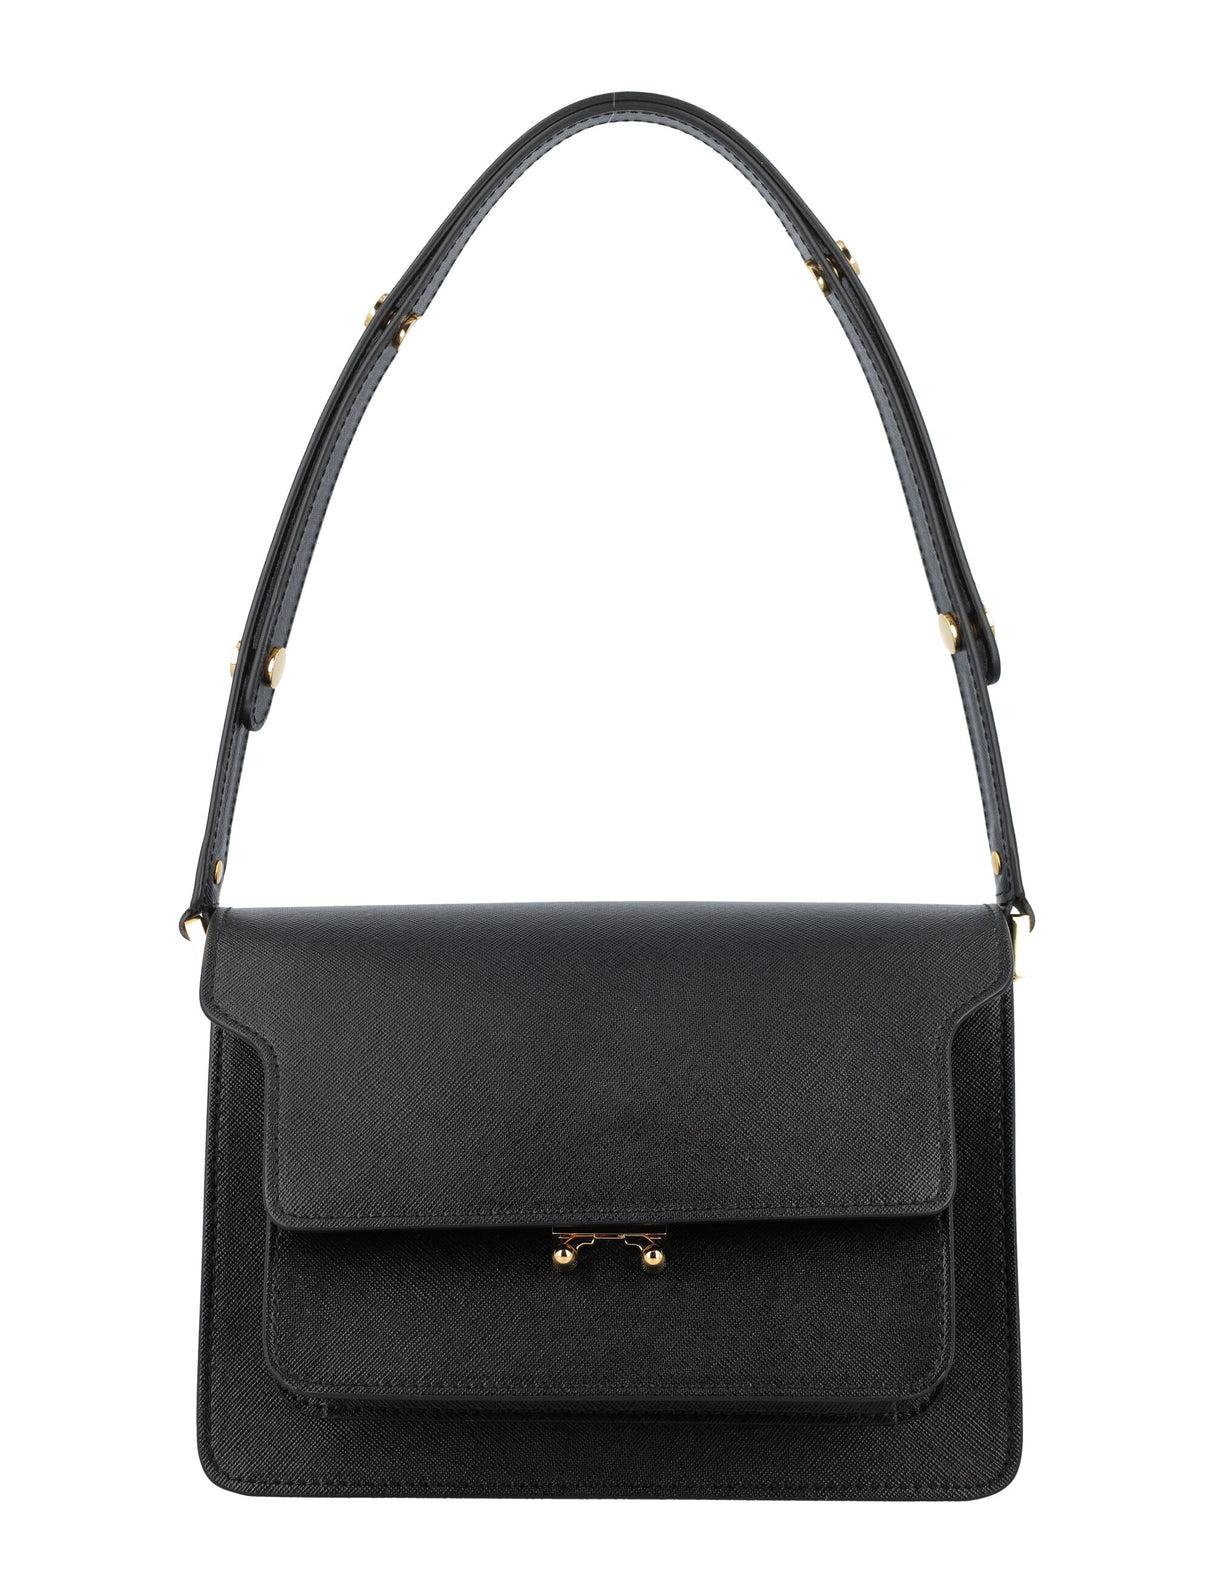 MARNI Chic Black Leather Medium Trunk Handbag with Gold-Tone Accents - Crossbody & Shoulder Carry